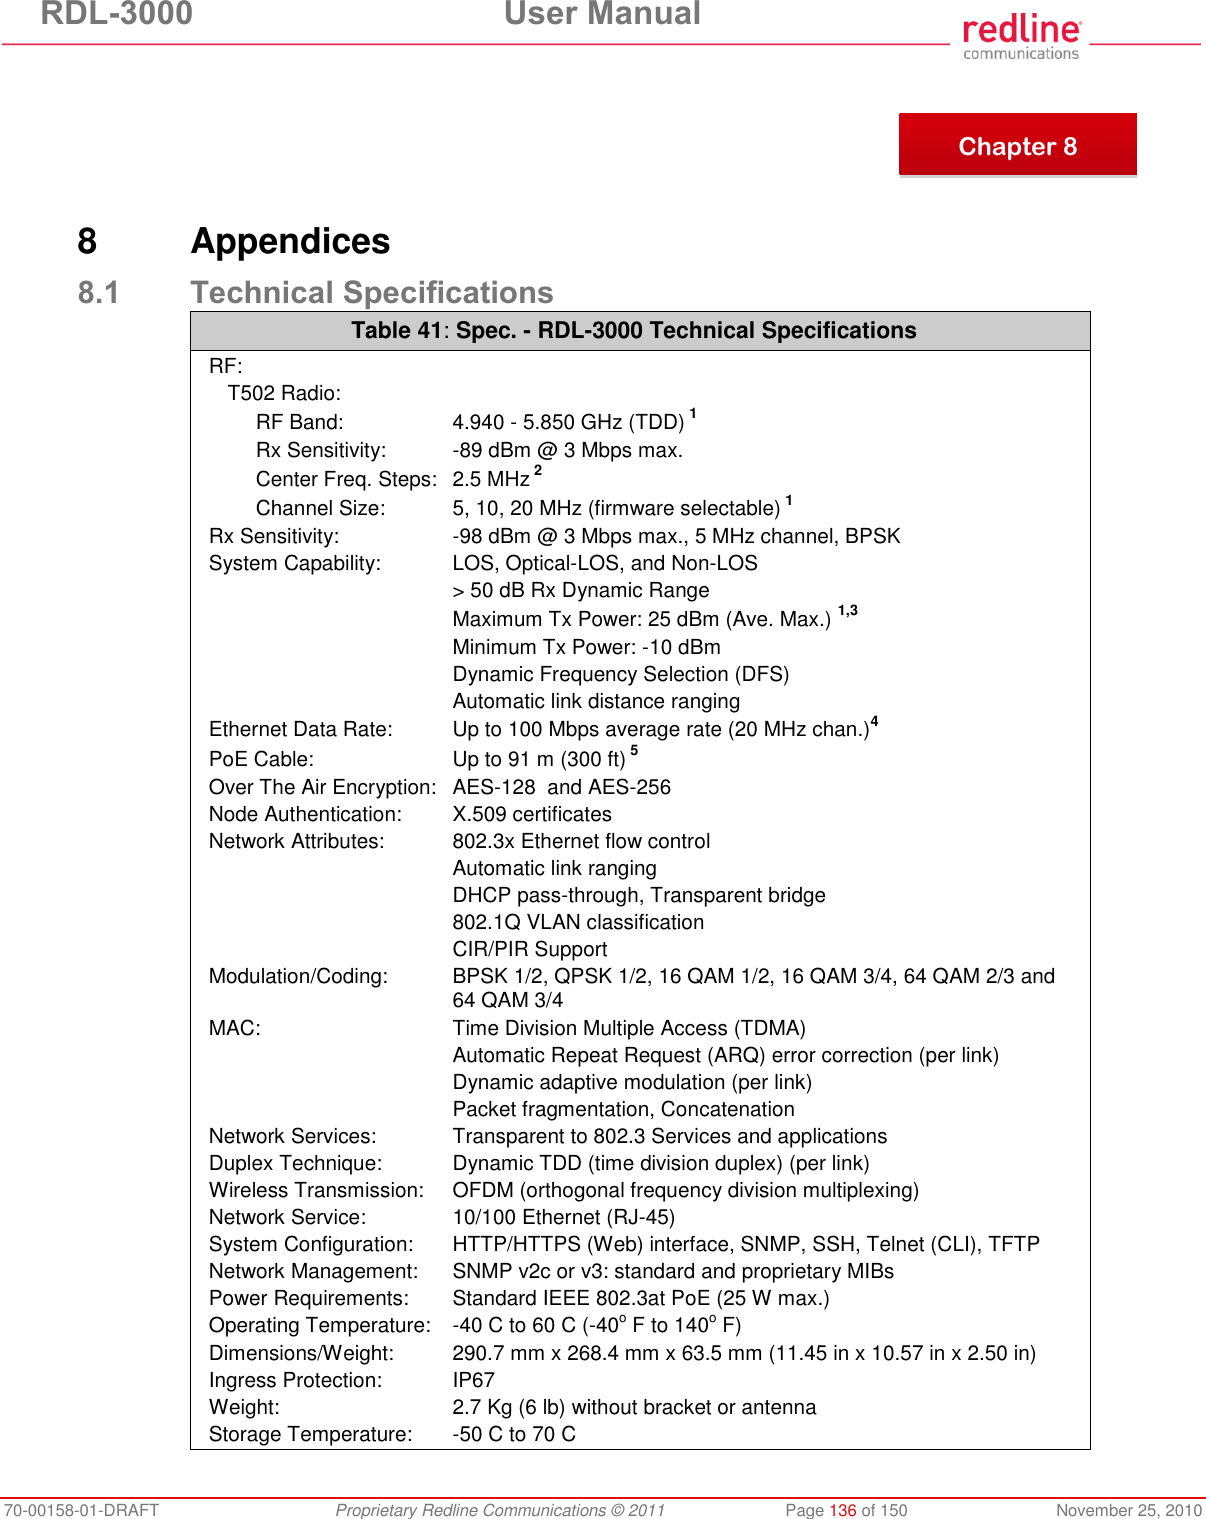 RDL-3000  User Manual 70-00158-01-DRAFT  Proprietary Redline Communications © 2011  Page 136 of 150  November 25, 2010       8  Appendices 8.1 Technical Specifications Table 41: Spec. - RDL-3000 Technical Specifications RF: T502 Radio:   RF Band:  4.940 - 5.850 GHz (TDD) 1   Rx Sensitivity:   -89 dBm @ 3 Mbps max.   Center Freq. Steps:  2.5 MHz 2   Channel Size:  5, 10, 20 MHz (firmware selectable) 1 Rx Sensitivity:  -98 dBm @ 3 Mbps max., 5 MHz channel, BPSK System Capability:  LOS, Optical-LOS, and Non-LOS   &gt; 50 dB Rx Dynamic Range   Maximum Tx Power: 25 dBm (Ave. Max.) 1,3   Minimum Tx Power: -10 dBm   Dynamic Frequency Selection (DFS)   Automatic link distance ranging Ethernet Data Rate:  Up to 100 Mbps average rate (20 MHz chan.)4 PoE Cable:  Up to 91 m (300 ft) 5 Over The Air Encryption:  AES-128  and AES-256 Node Authentication:  X.509 certificates Network Attributes:  802.3x Ethernet flow control   Automatic link ranging   DHCP pass-through, Transparent bridge   802.1Q VLAN classification   CIR/PIR Support Modulation/Coding:  BPSK 1/2, QPSK 1/2, 16 QAM 1/2, 16 QAM 3/4, 64 QAM 2/3 and 64 QAM 3/4 MAC:  Time Division Multiple Access (TDMA)   Automatic Repeat Request (ARQ) error correction (per link)   Dynamic adaptive modulation (per link)    Packet fragmentation, Concatenation Network Services:  Transparent to 802.3 Services and applications Duplex Technique:  Dynamic TDD (time division duplex) (per link) Wireless Transmission:  OFDM (orthogonal frequency division multiplexing) Network Service:  10/100 Ethernet (RJ-45) System Configuration:  HTTP/HTTPS (Web) interface, SNMP, SSH, Telnet (CLI), TFTP Network Management:  SNMP v2c or v3: standard and proprietary MIBs Power Requirements:  Standard IEEE 802.3at PoE (25 W max.) Operating Temperature:   -40 C to 60 C (-40o F to 140o F) Dimensions/Weight:  290.7 mm x 268.4 mm x 63.5 mm (11.45 in x 10.57 in x 2.50 in) Ingress Protection:  IP67 Weight:  2.7 Kg (6 lb) without bracket or antenna Storage Temperature:   -50 C to 70 C  Chapter 8 